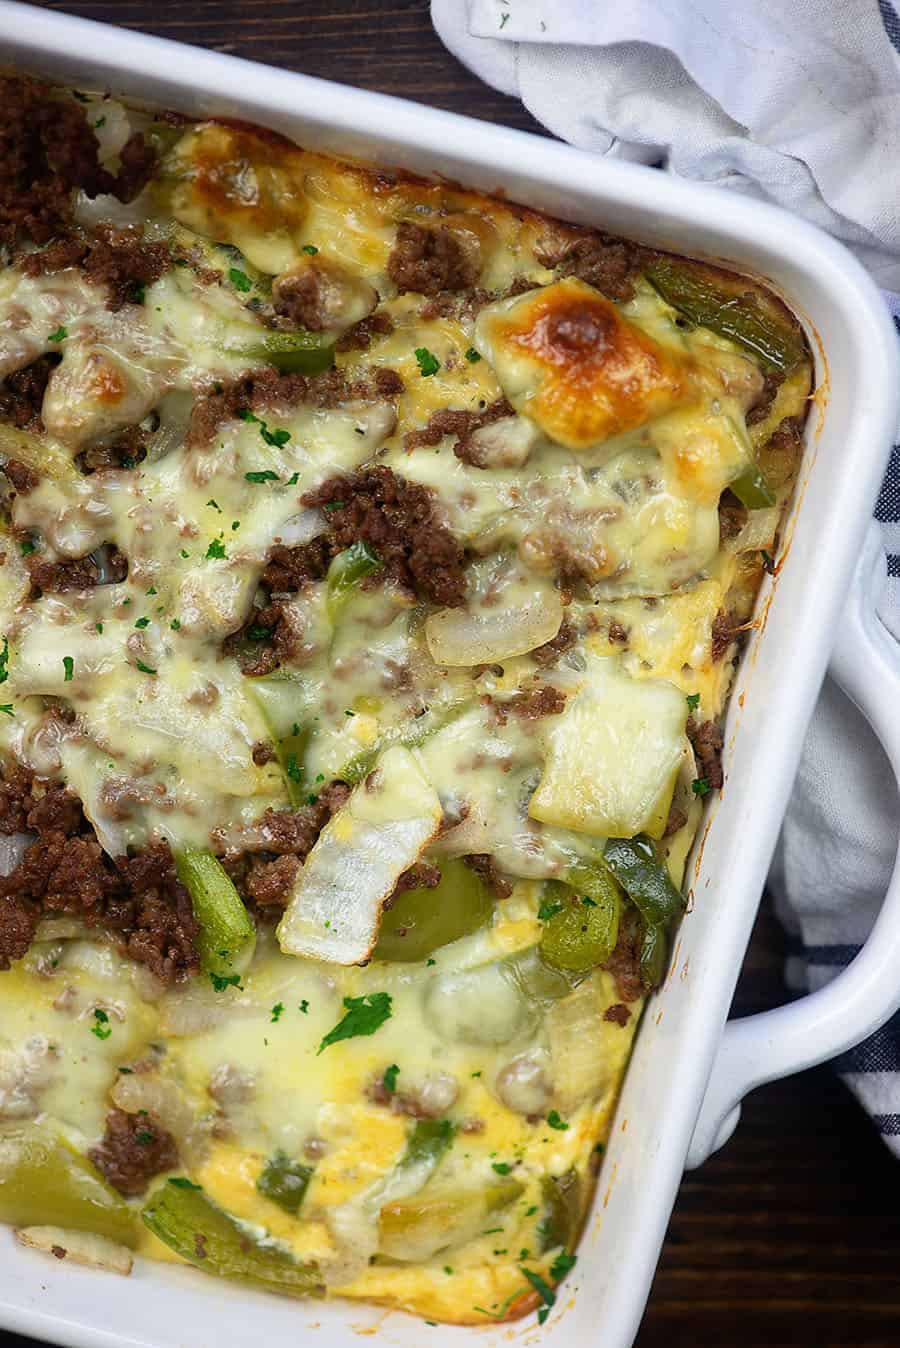 Philly cheesesteak casserole in a white baking pan